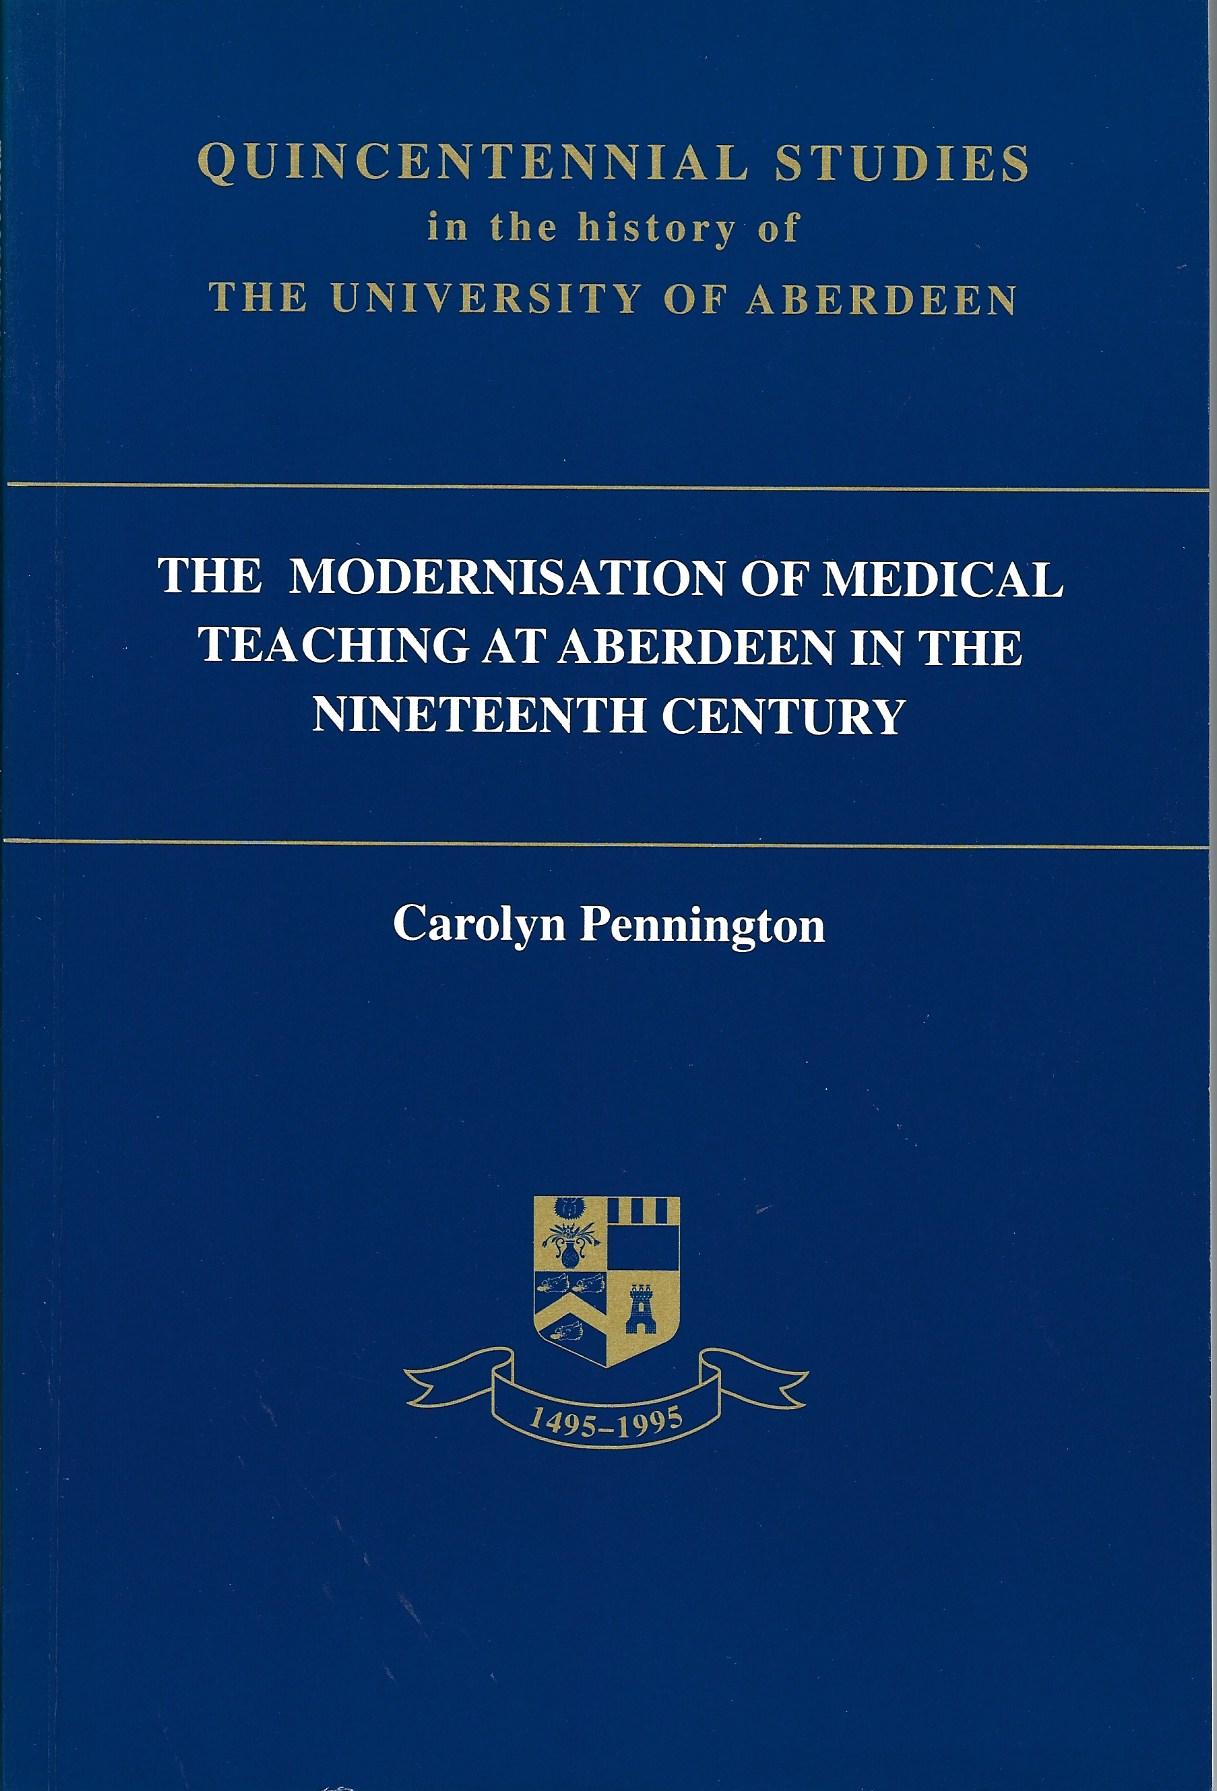 Image for Modernisation of Medical Teaching at Aberdeen in the Nineteenth Century (Quincentennial Studies in the History of the University of Aberdeen)